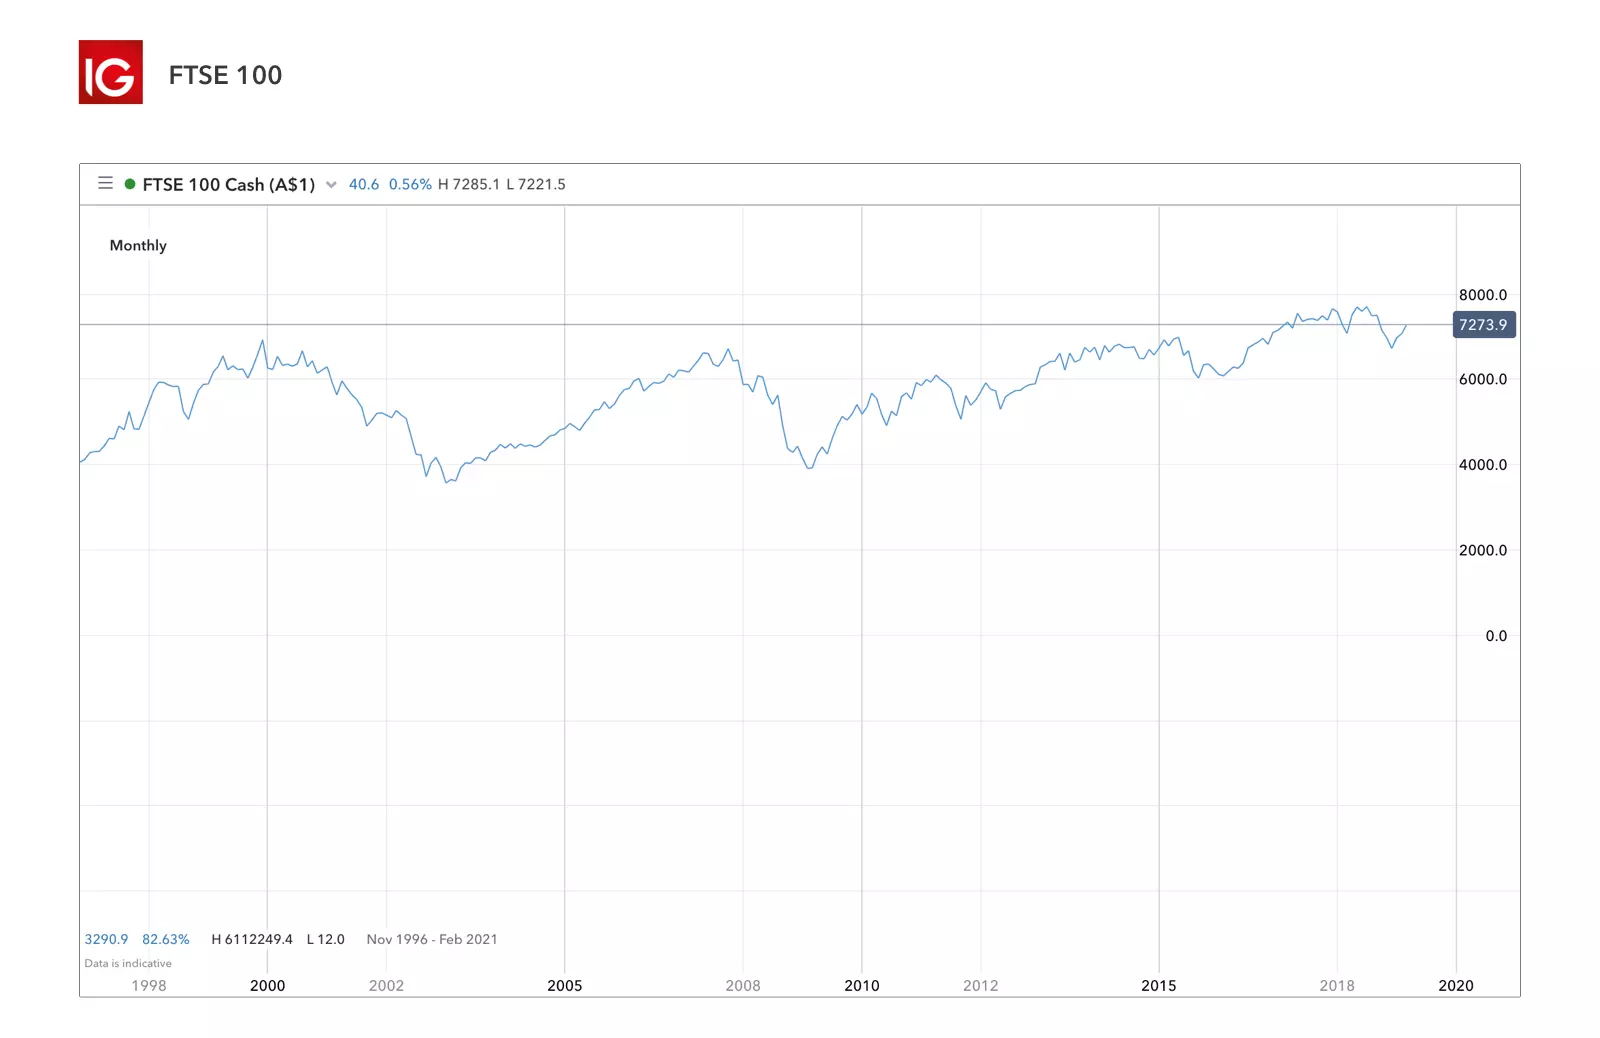 FTSE 100 price chart from 1995 to 2019